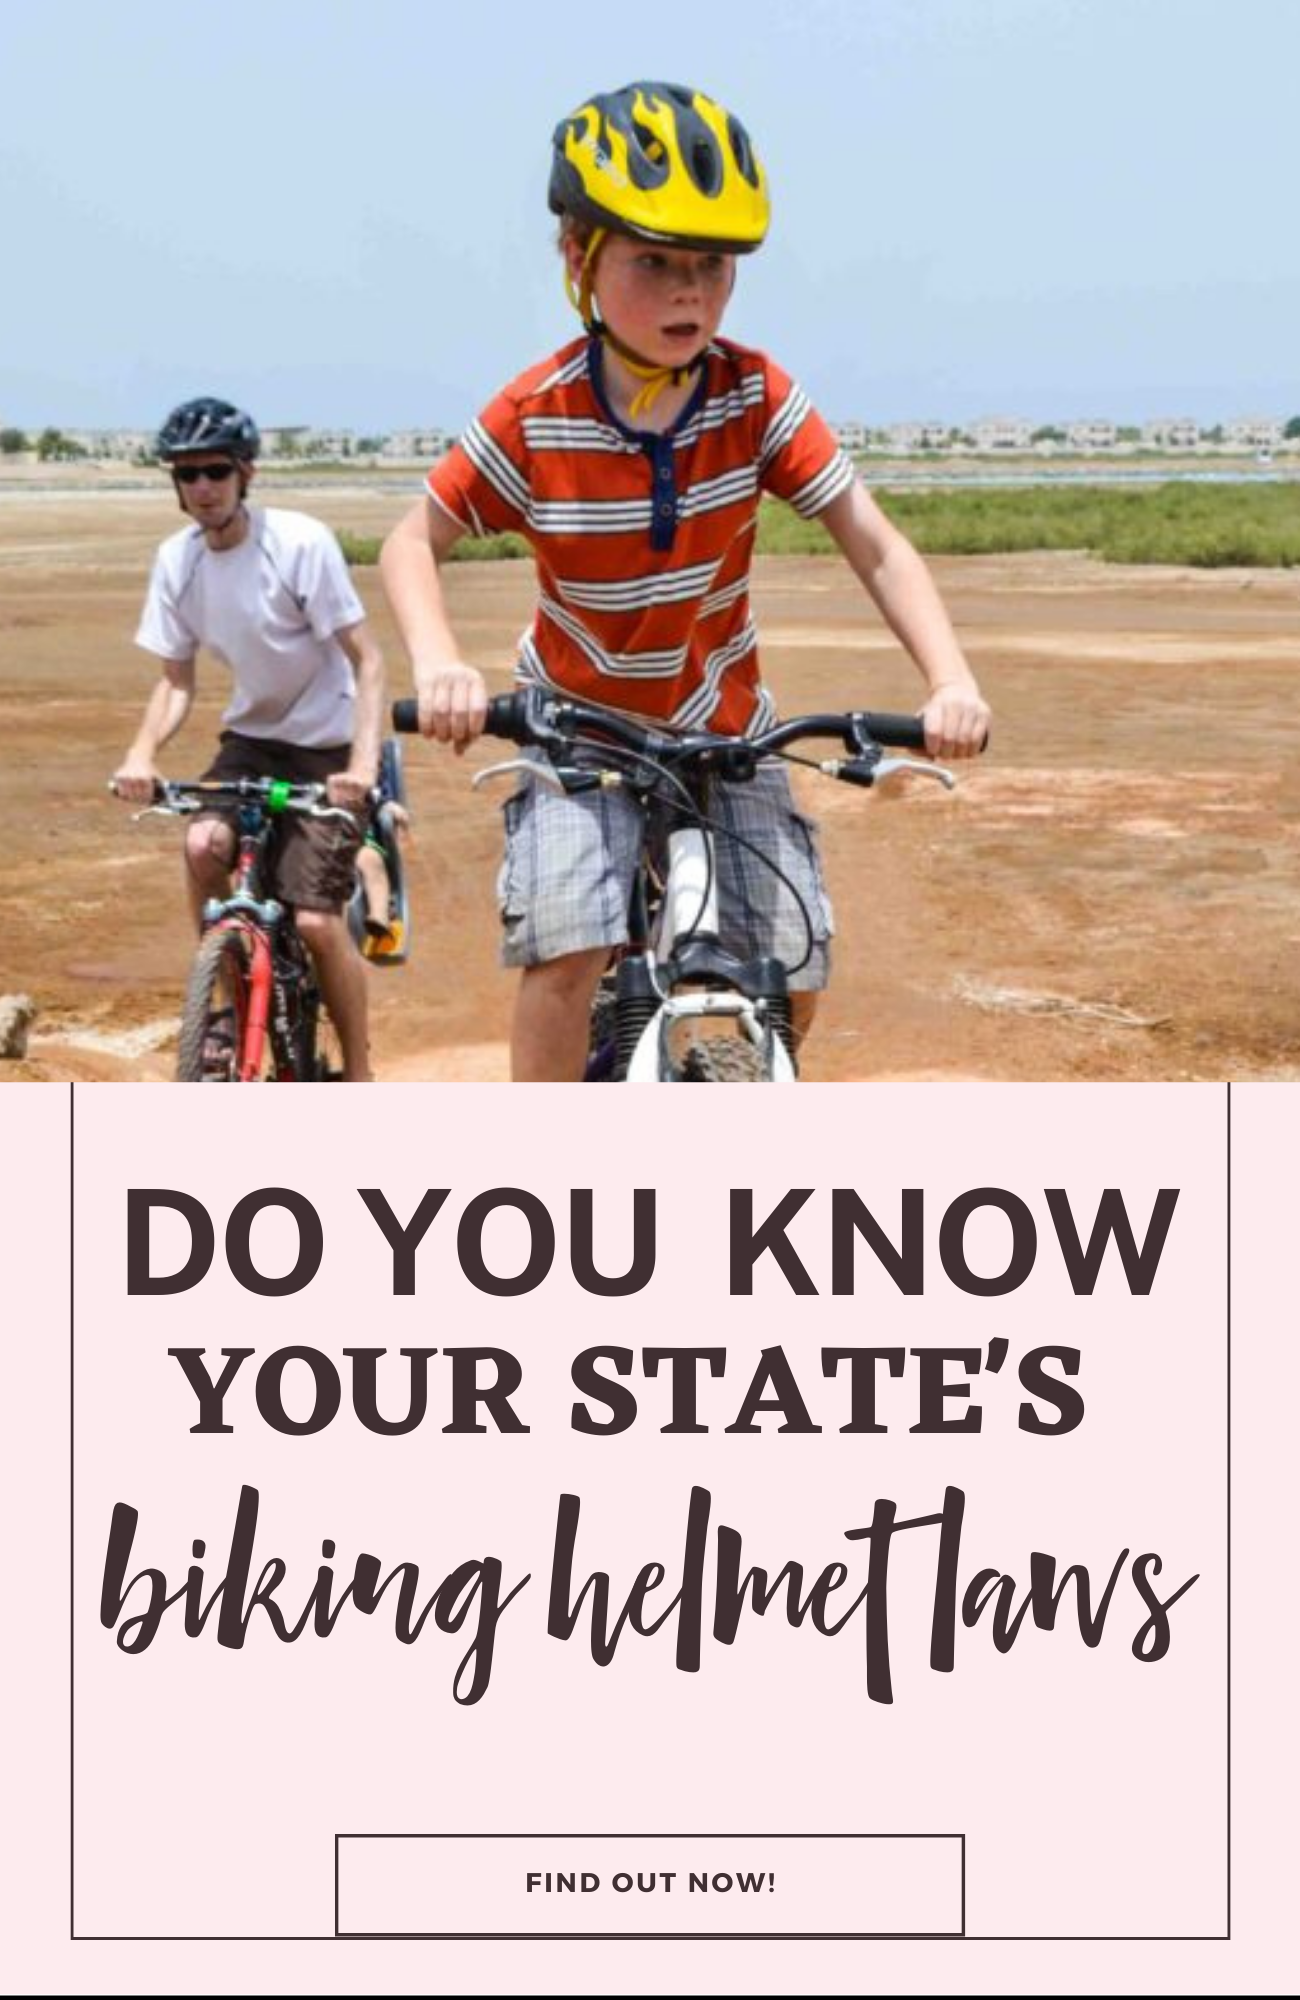 ny state helmet laws for kid riders